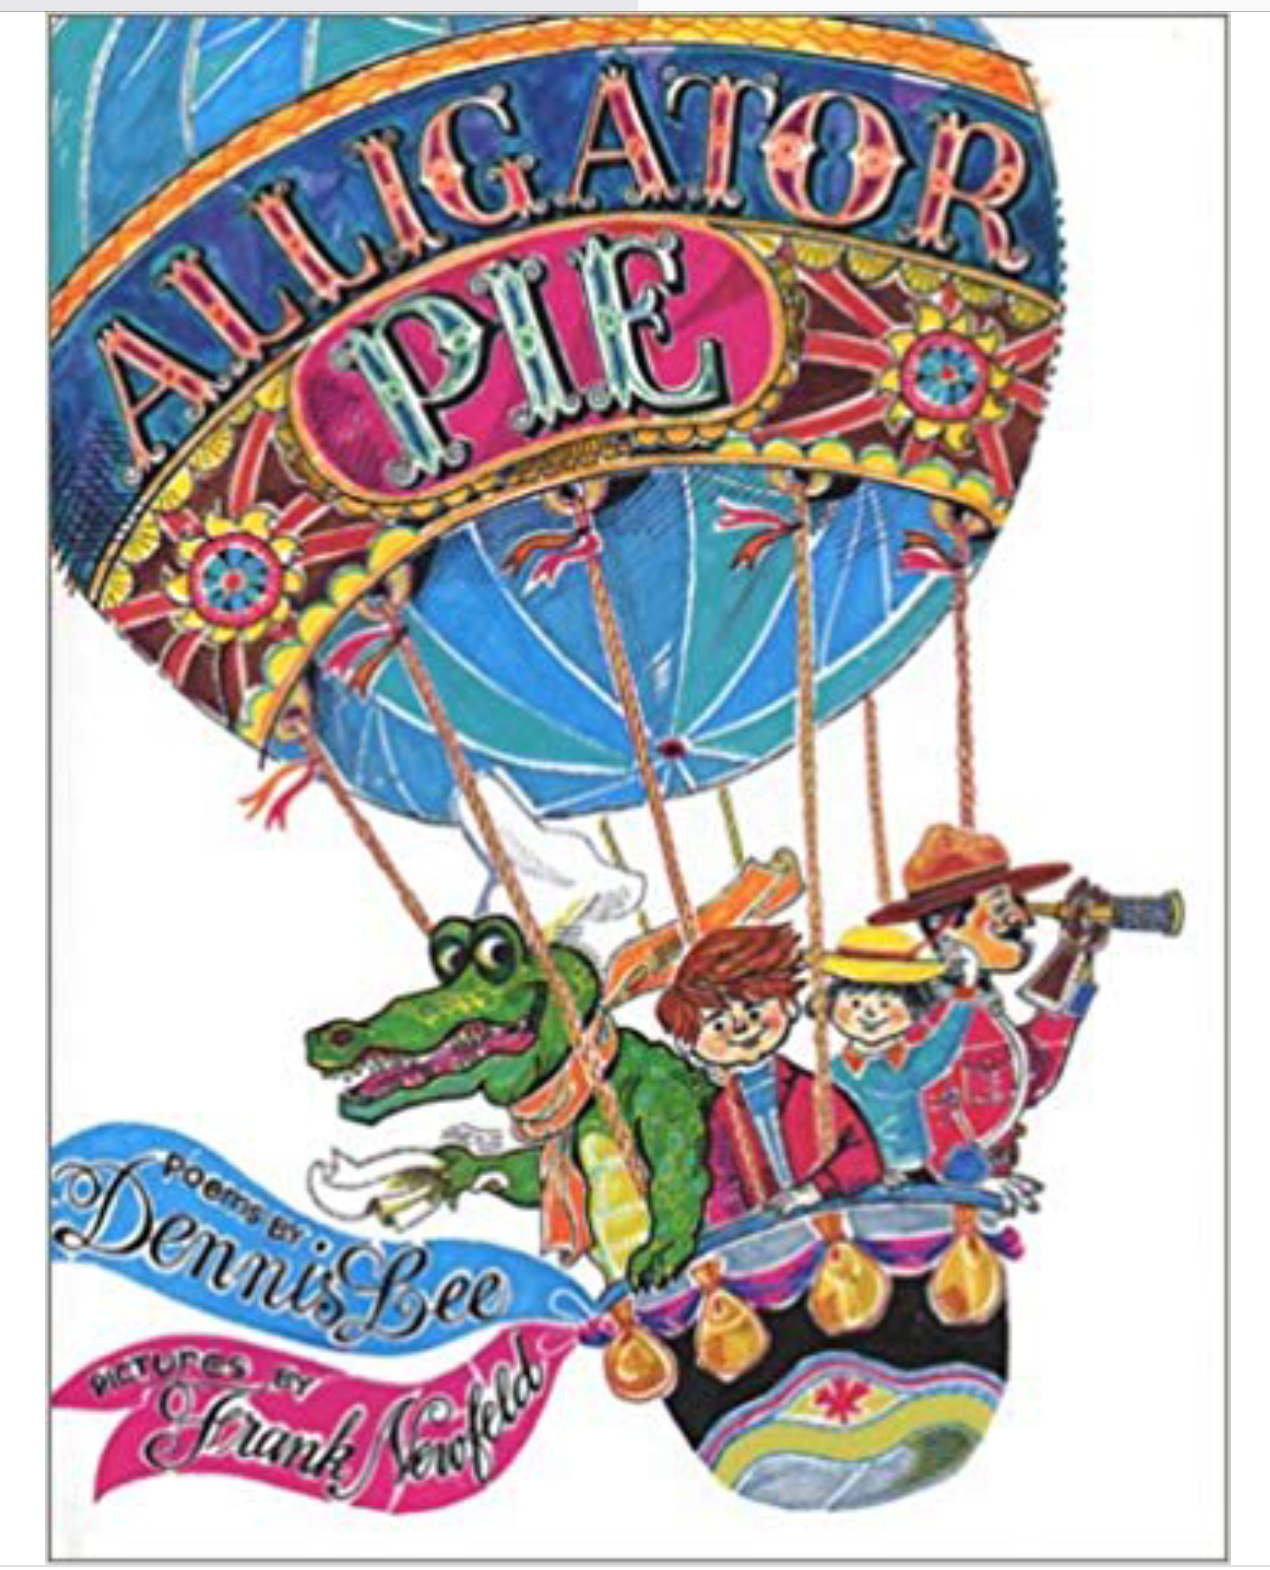 An image of the cover of Alligator Pie.